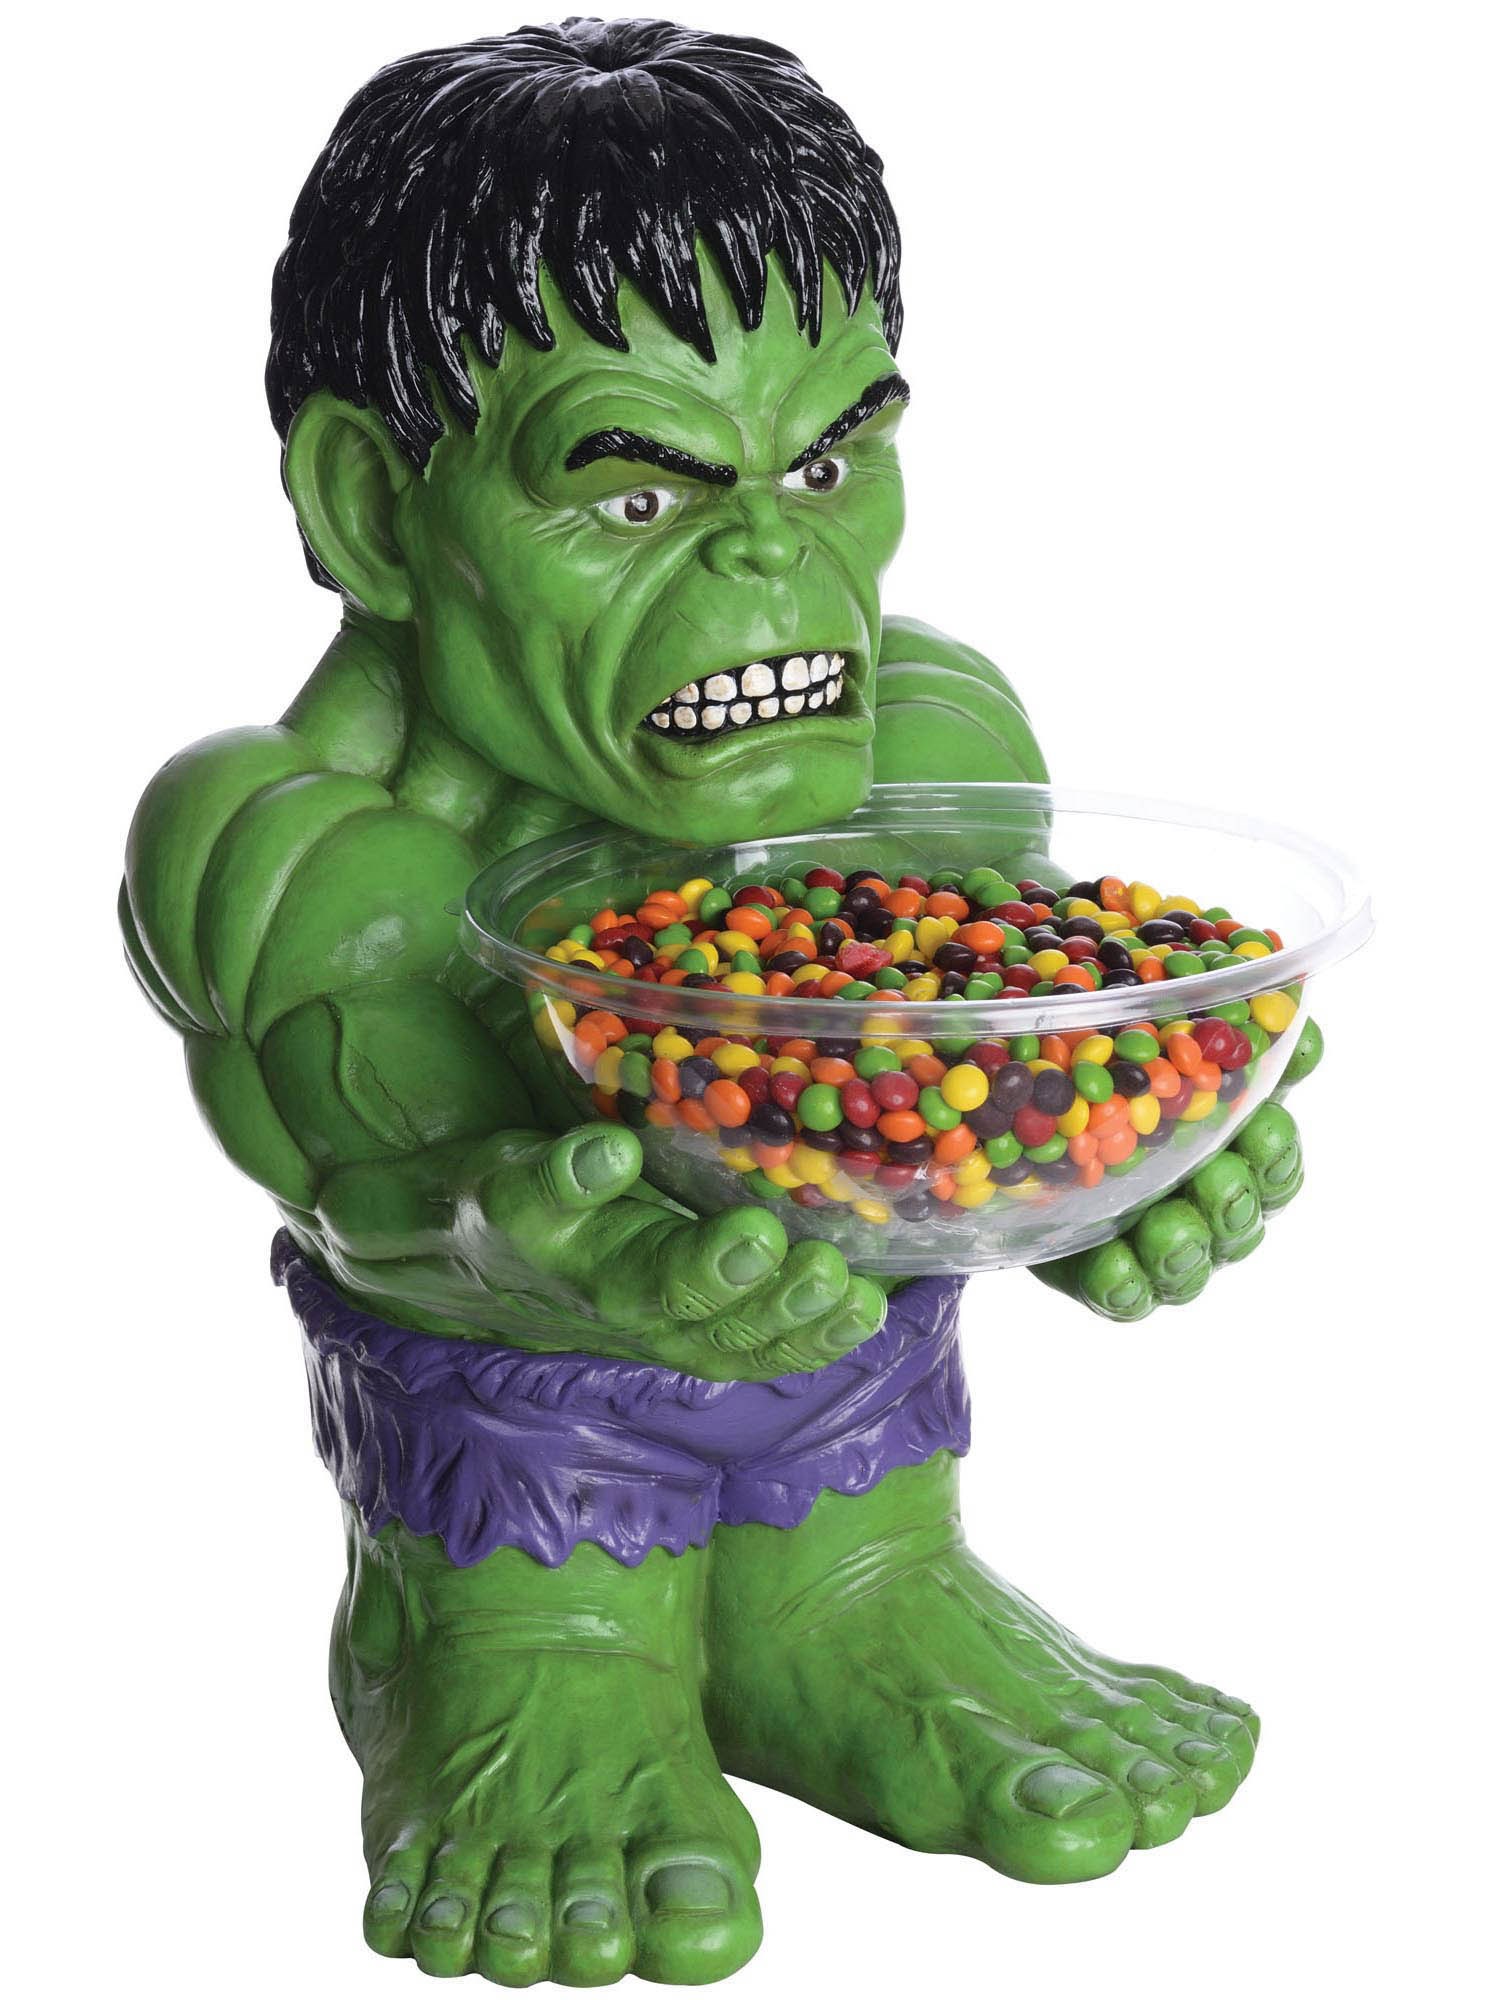 The Hulk Candy Bowl and Holder